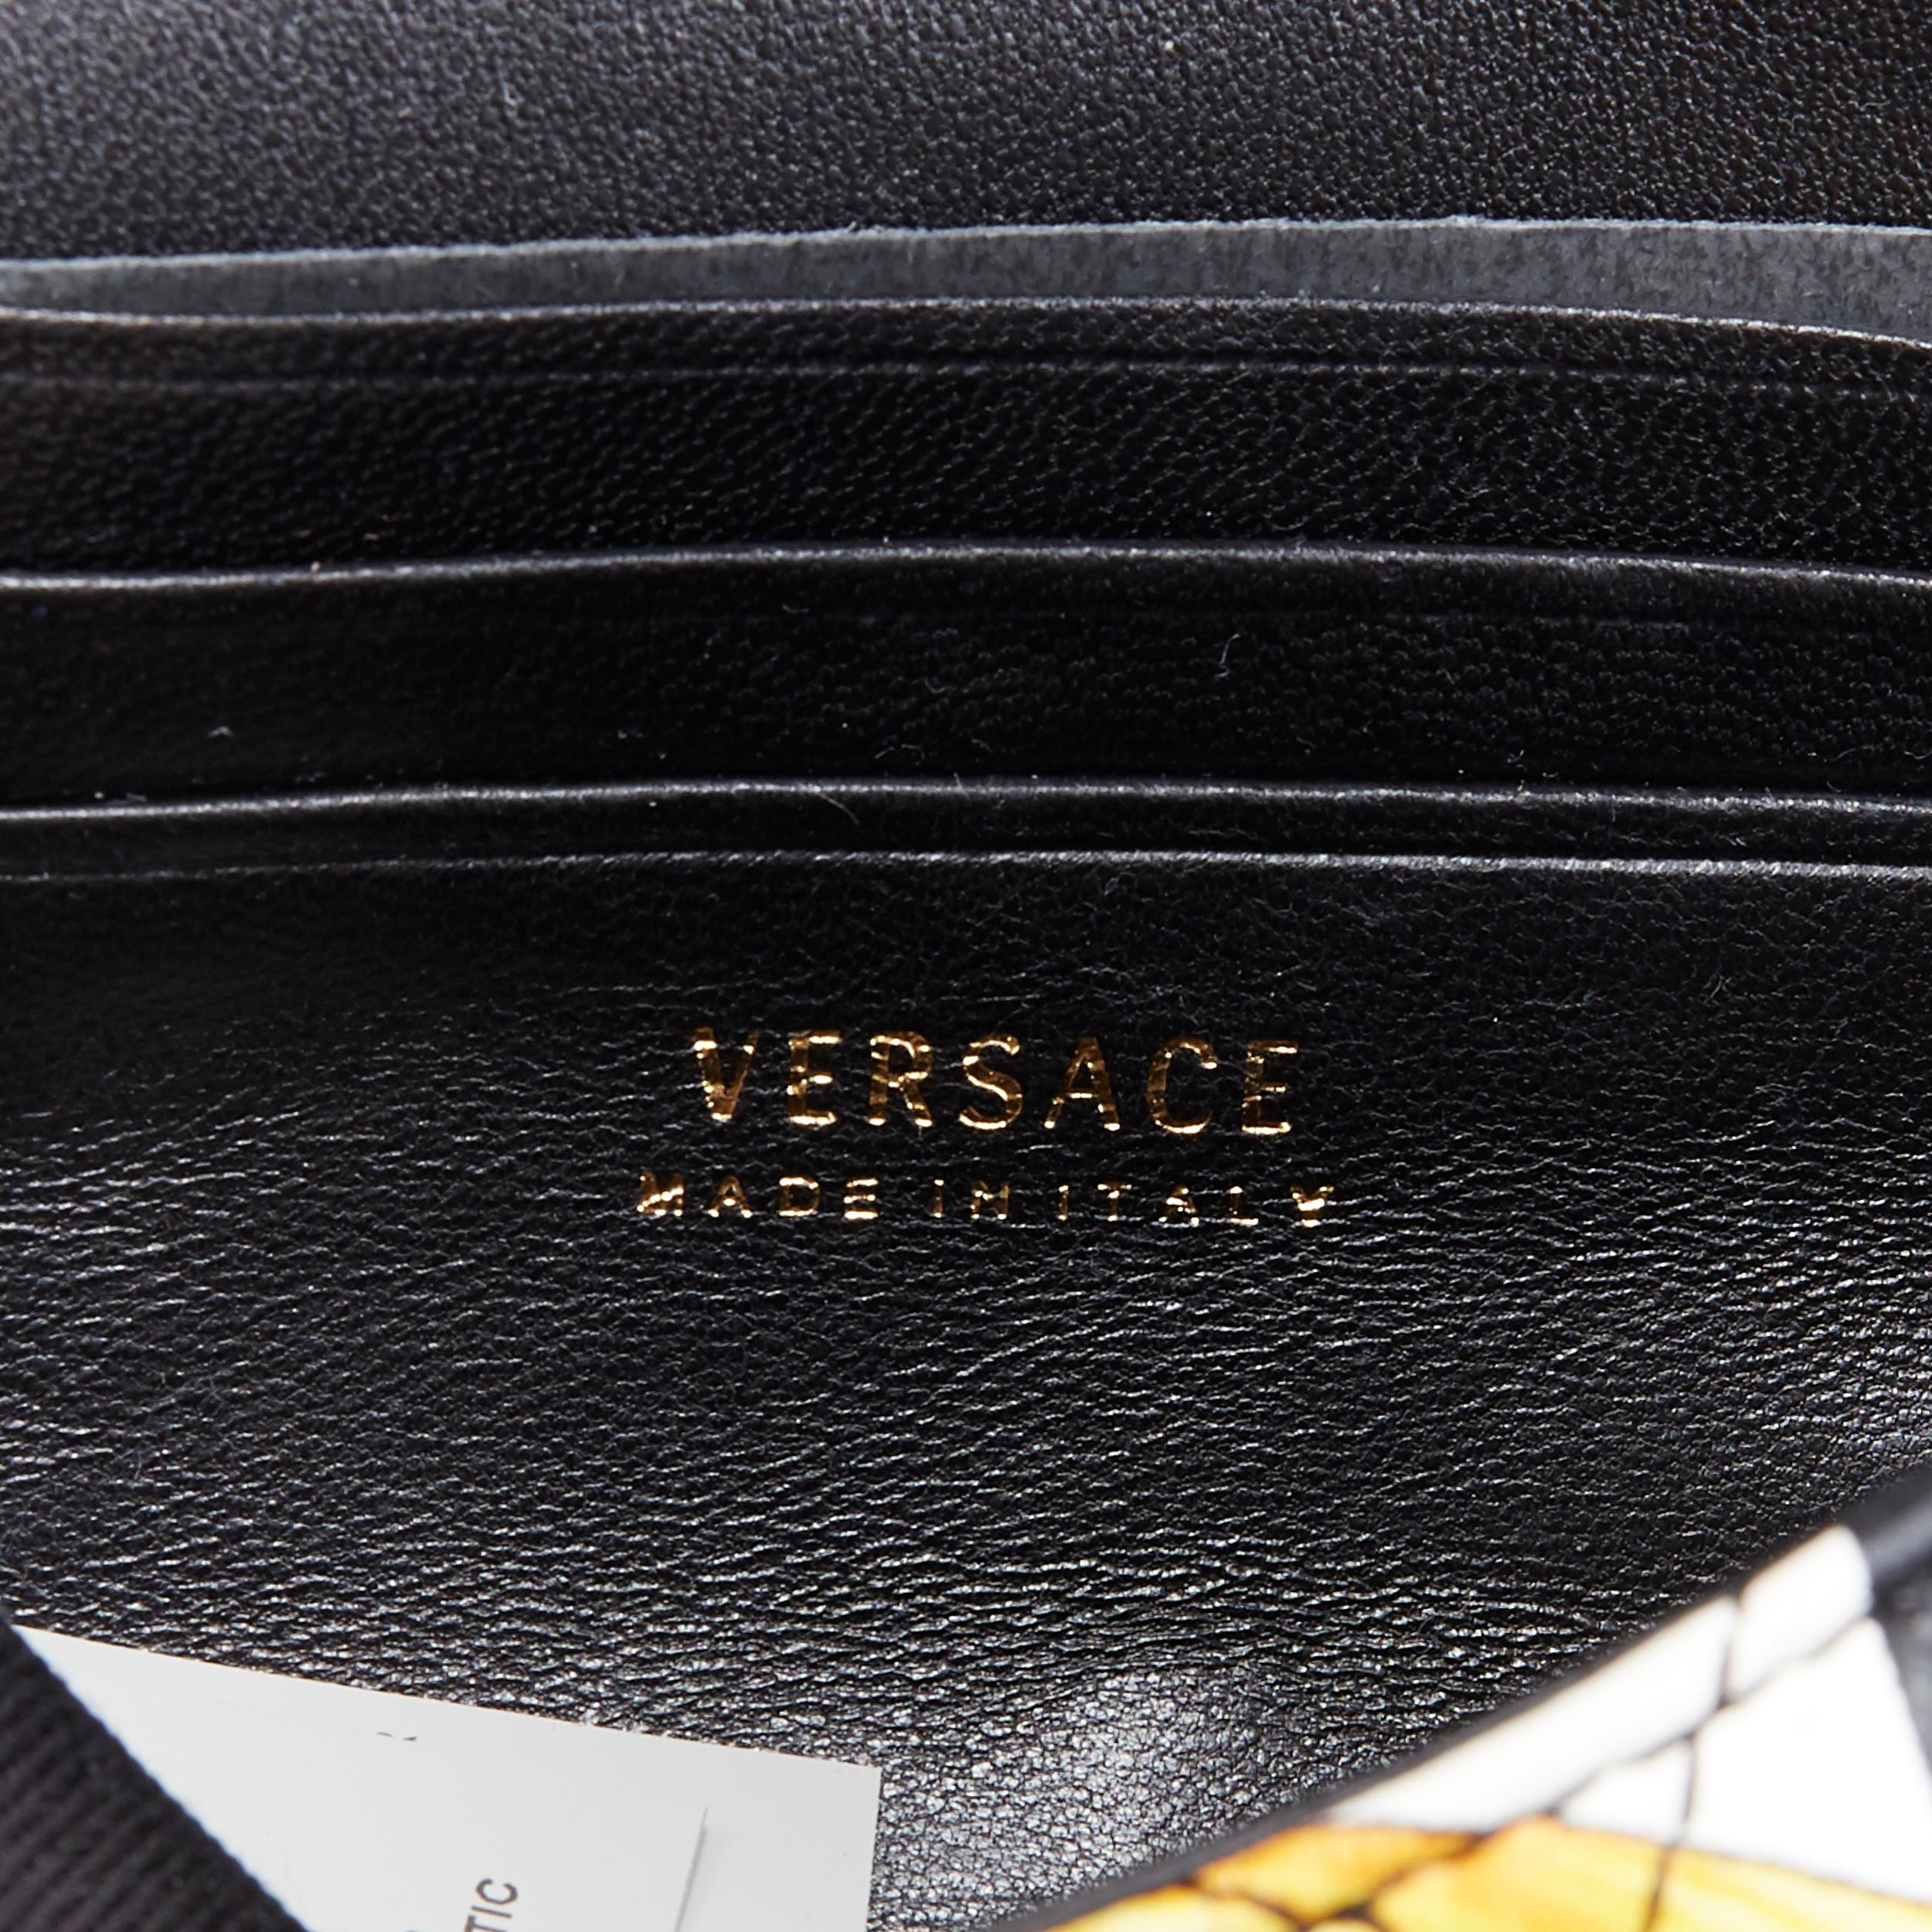 new VERSACE AW19 black white Greca gold baroque print quilted leather Medusa bag 6